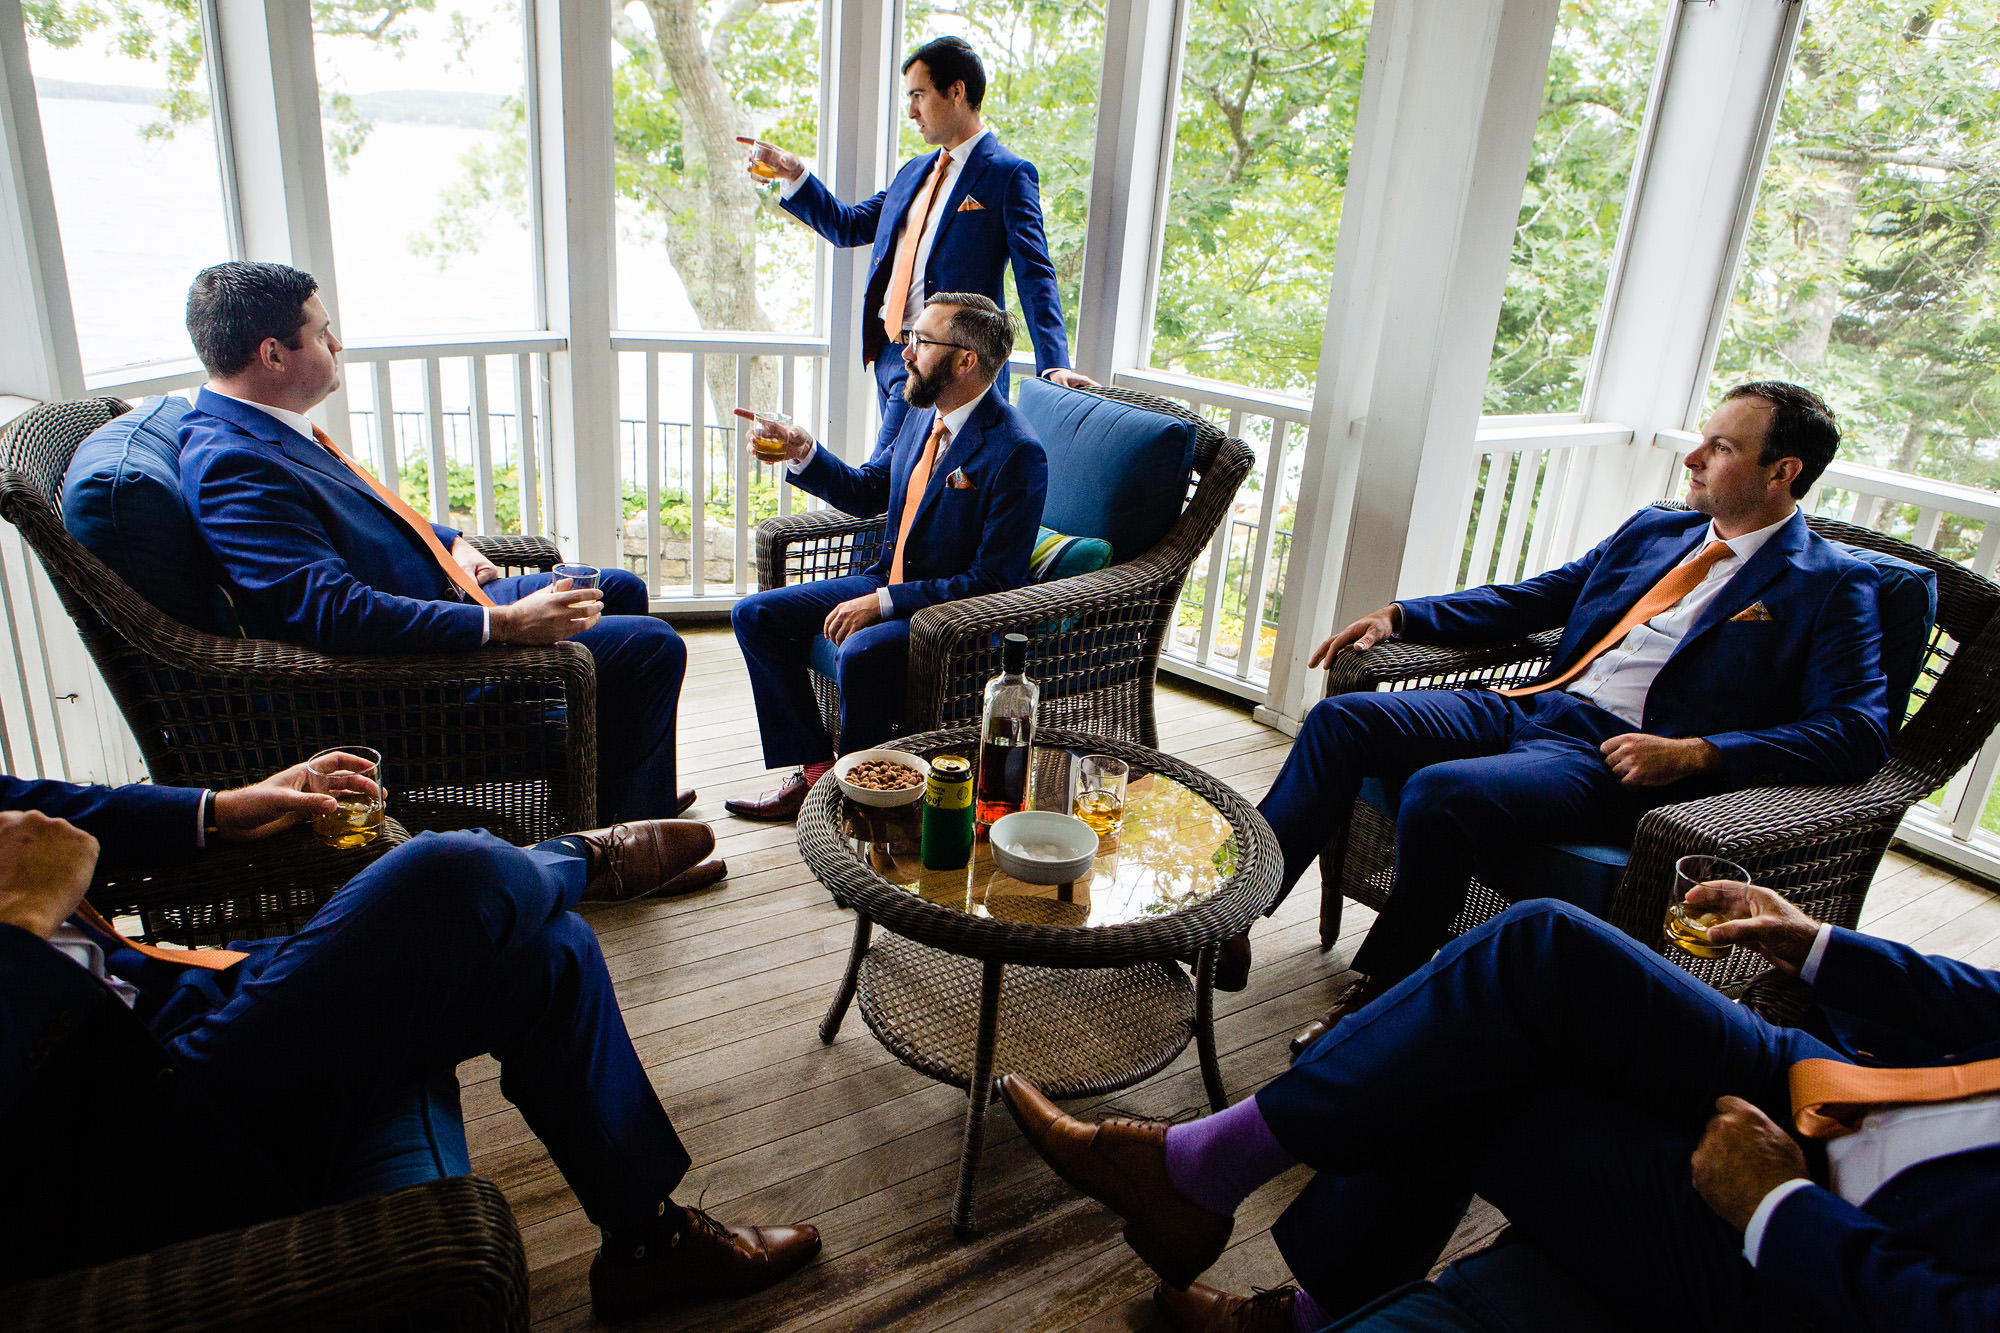 The groom and his groomsmen prepare for a Blue Hill Maine wedding